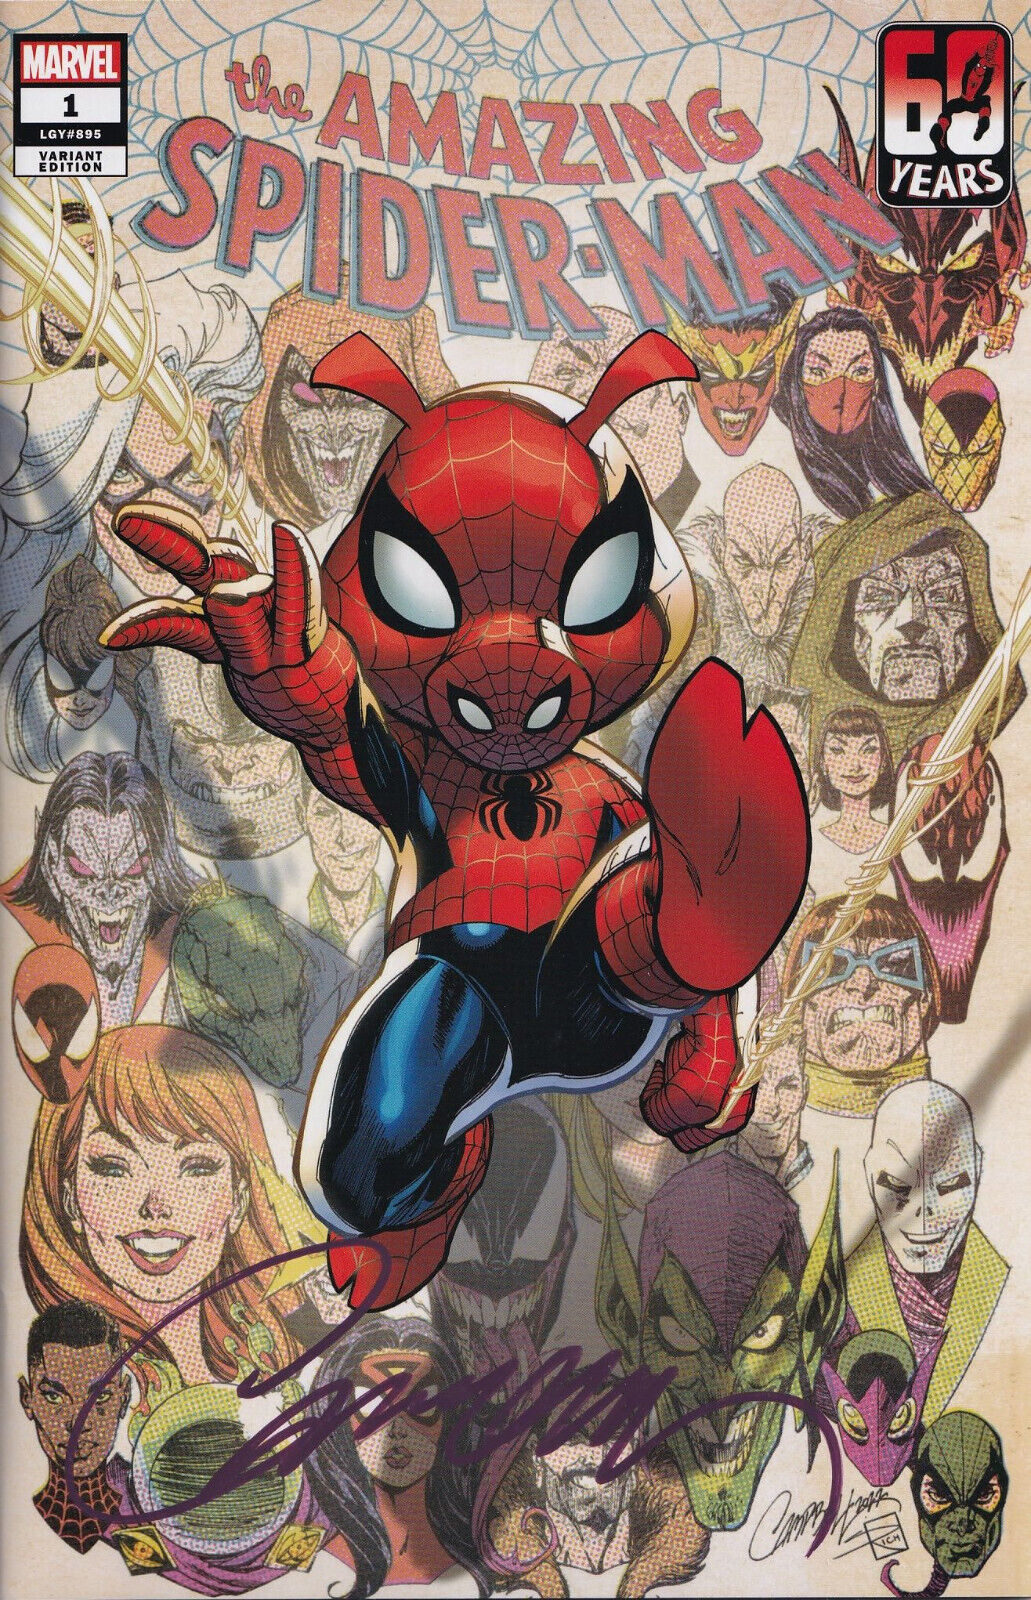 AMAZING SPIDER-MAN #1 (SIGNED BY J. SCOTT CAMPBELL)(JSC EXCLUSIVE VARIANT F)